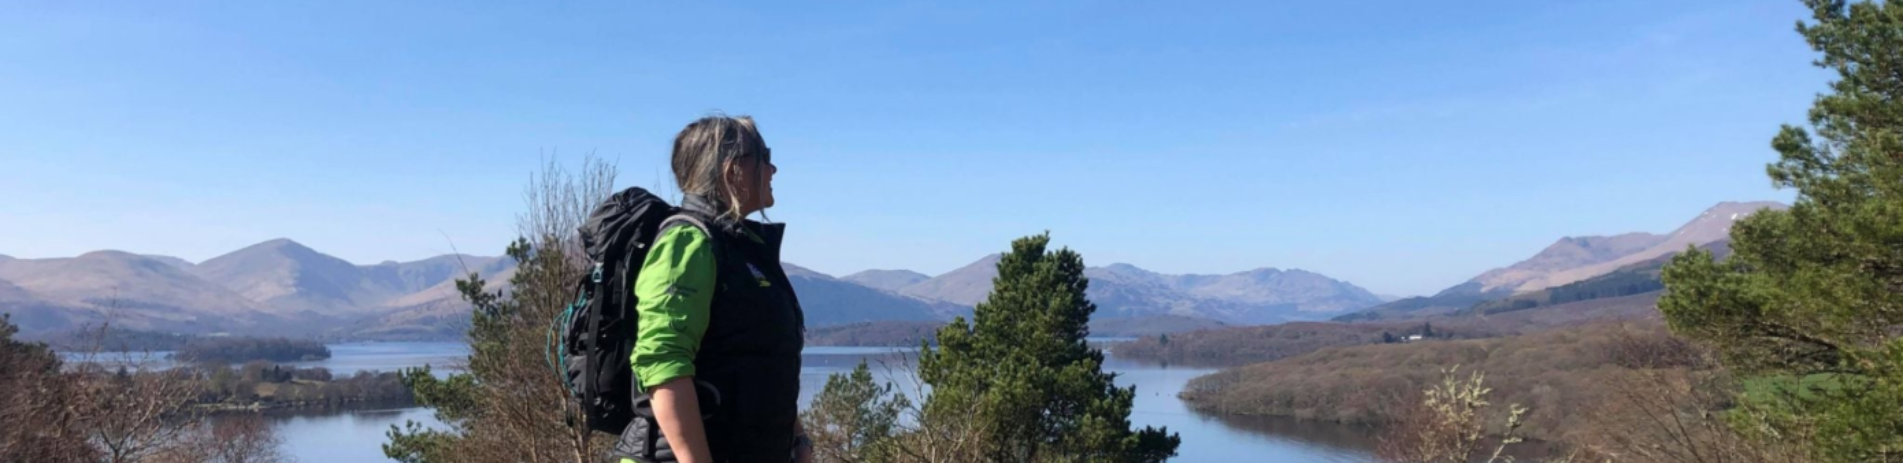 Ranger Louise Milne looking out at a view of lochs and hills at Craigie Fort